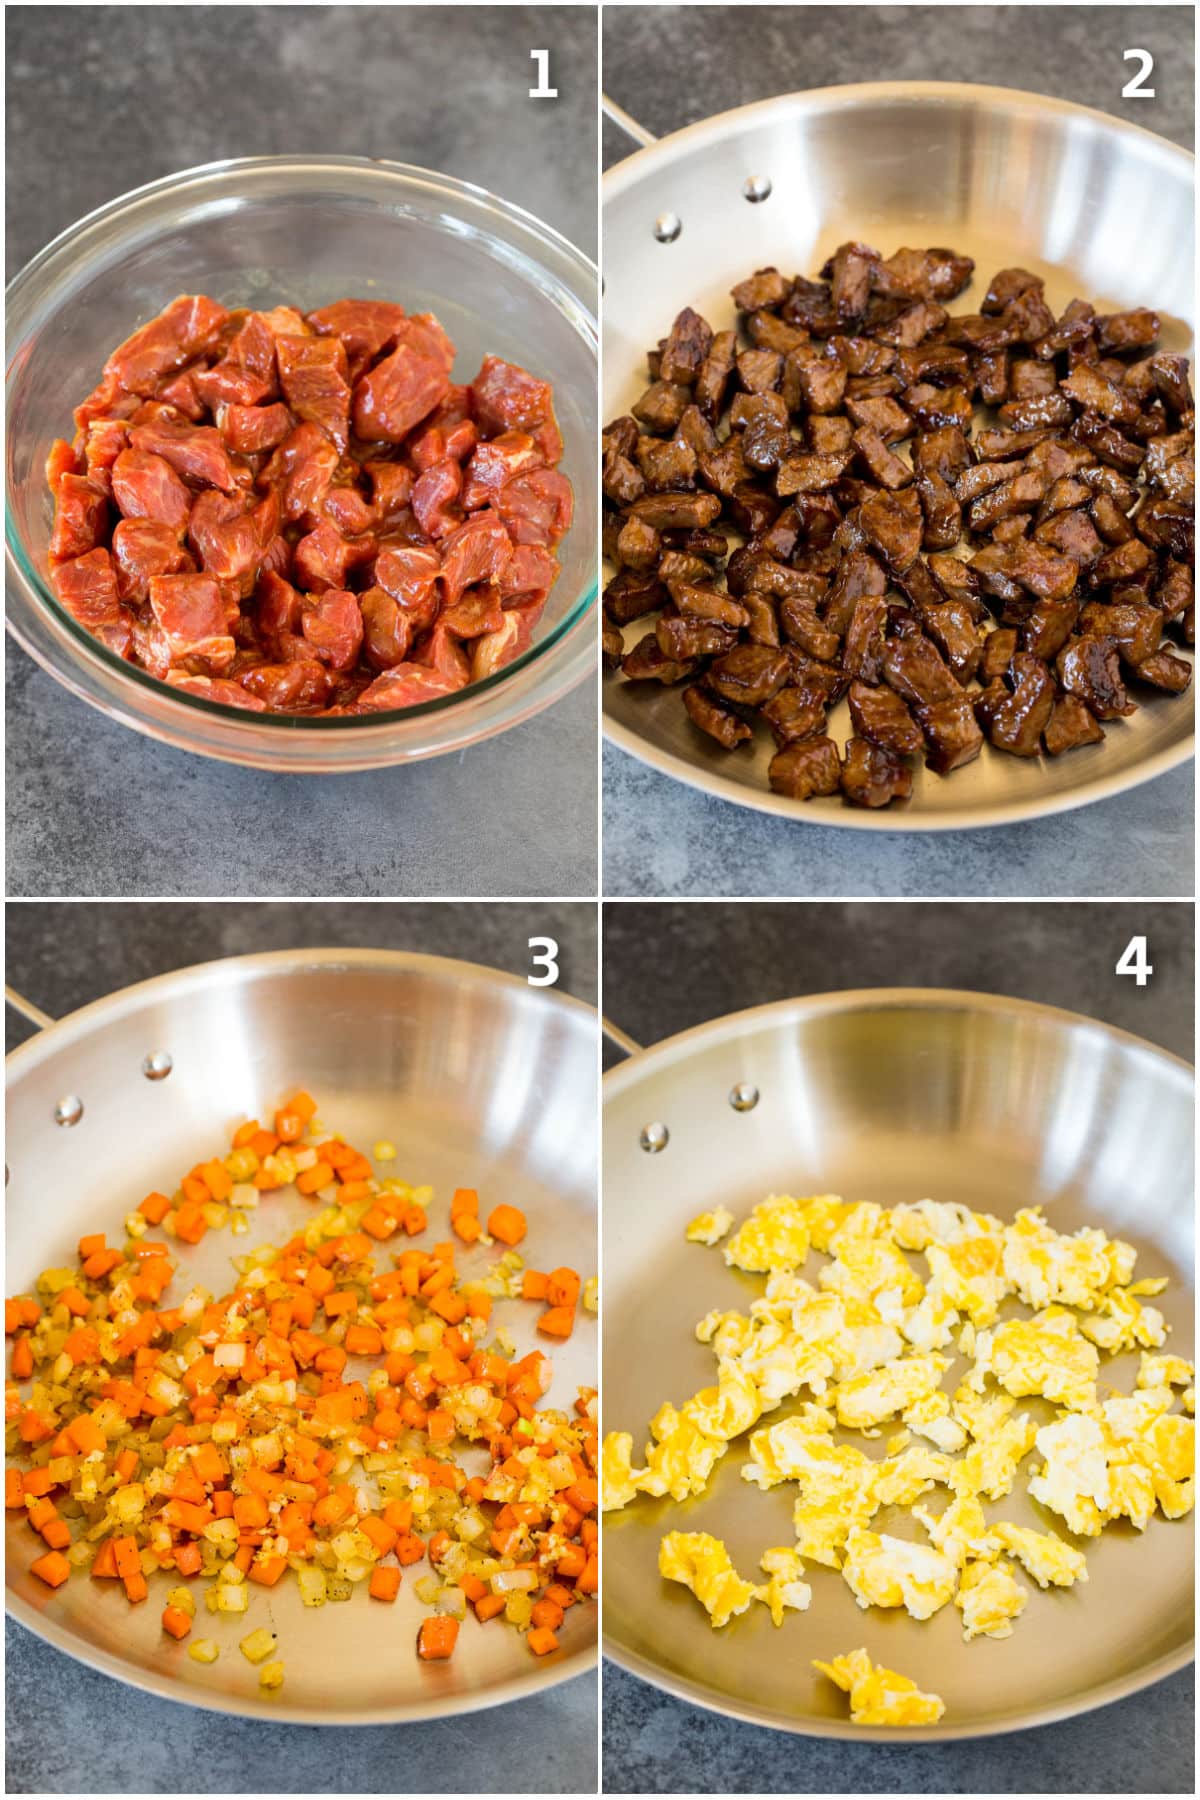 Process shows showing steak being marinated and vegetables and eggs cooked.